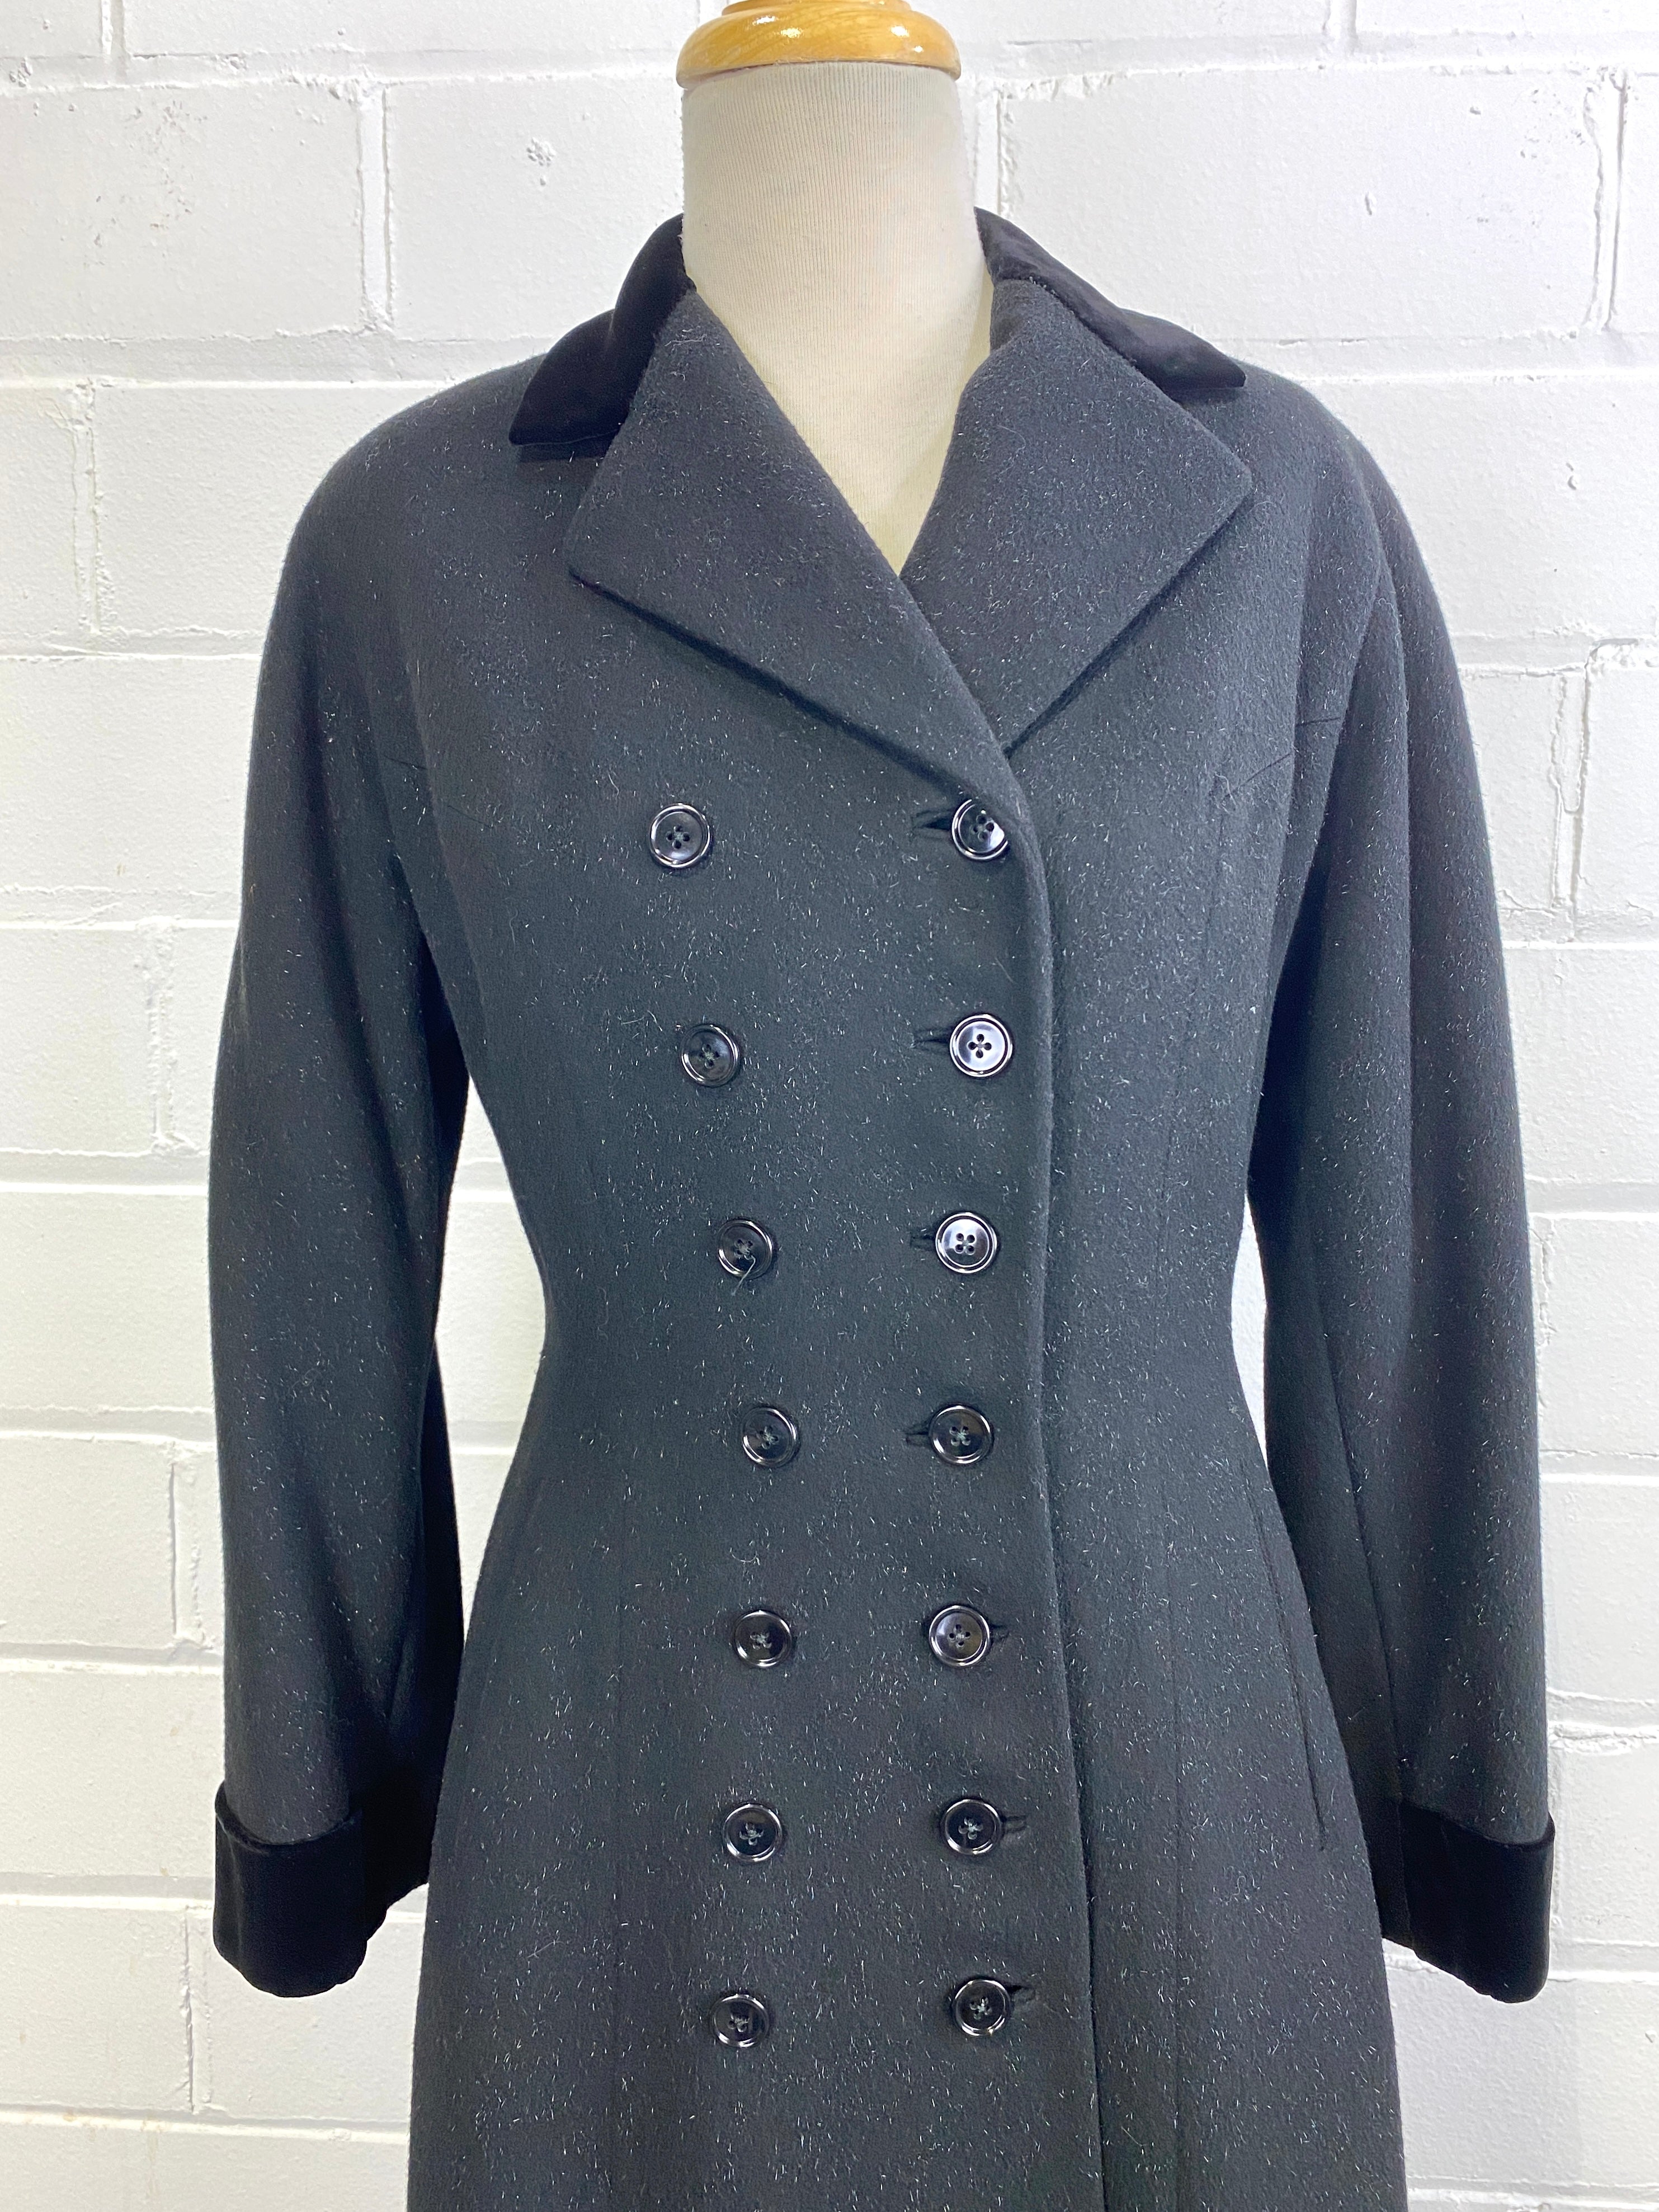 Vintage 1950s Black Wool Military-Style Double Breast Coat